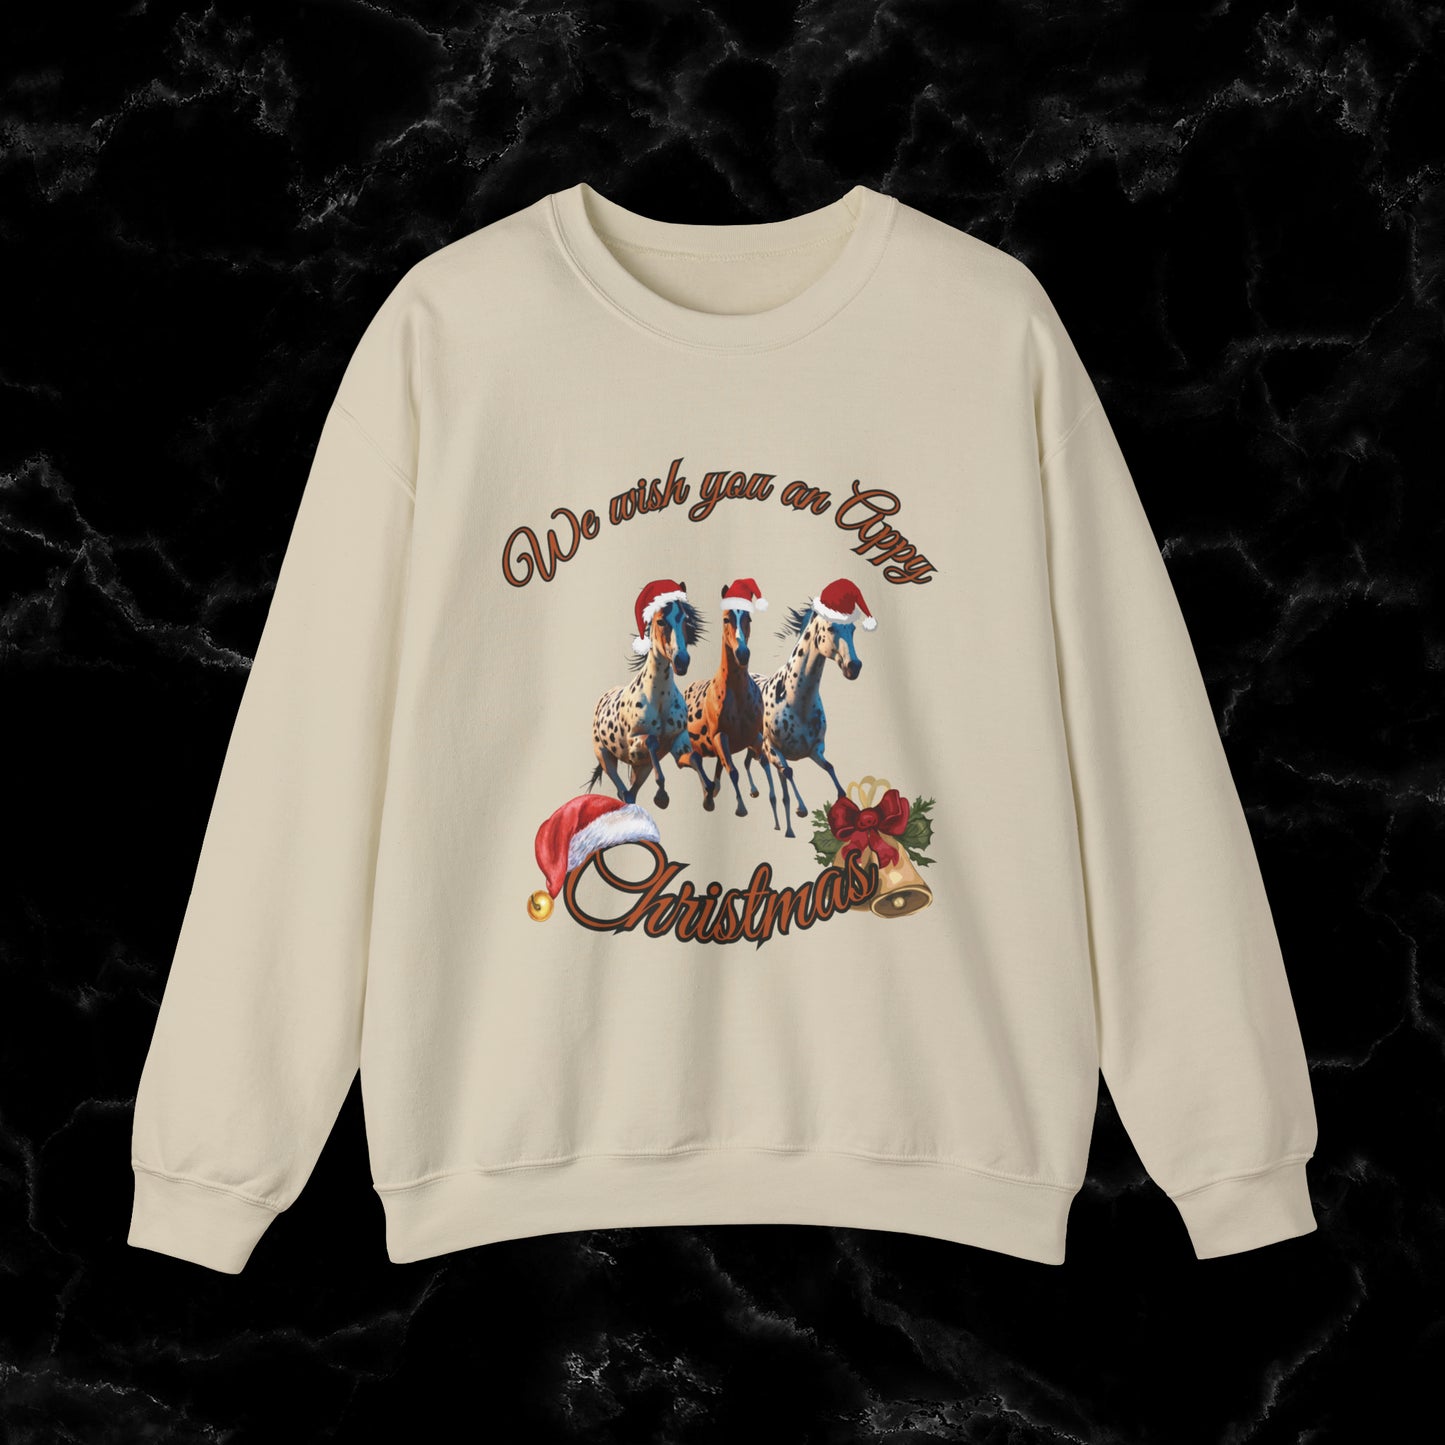 Appaloosa USA Sweatshirt - We Wish You An Appy Christmas - Cozy Equine Holiday Sweater for Horse Lovers!